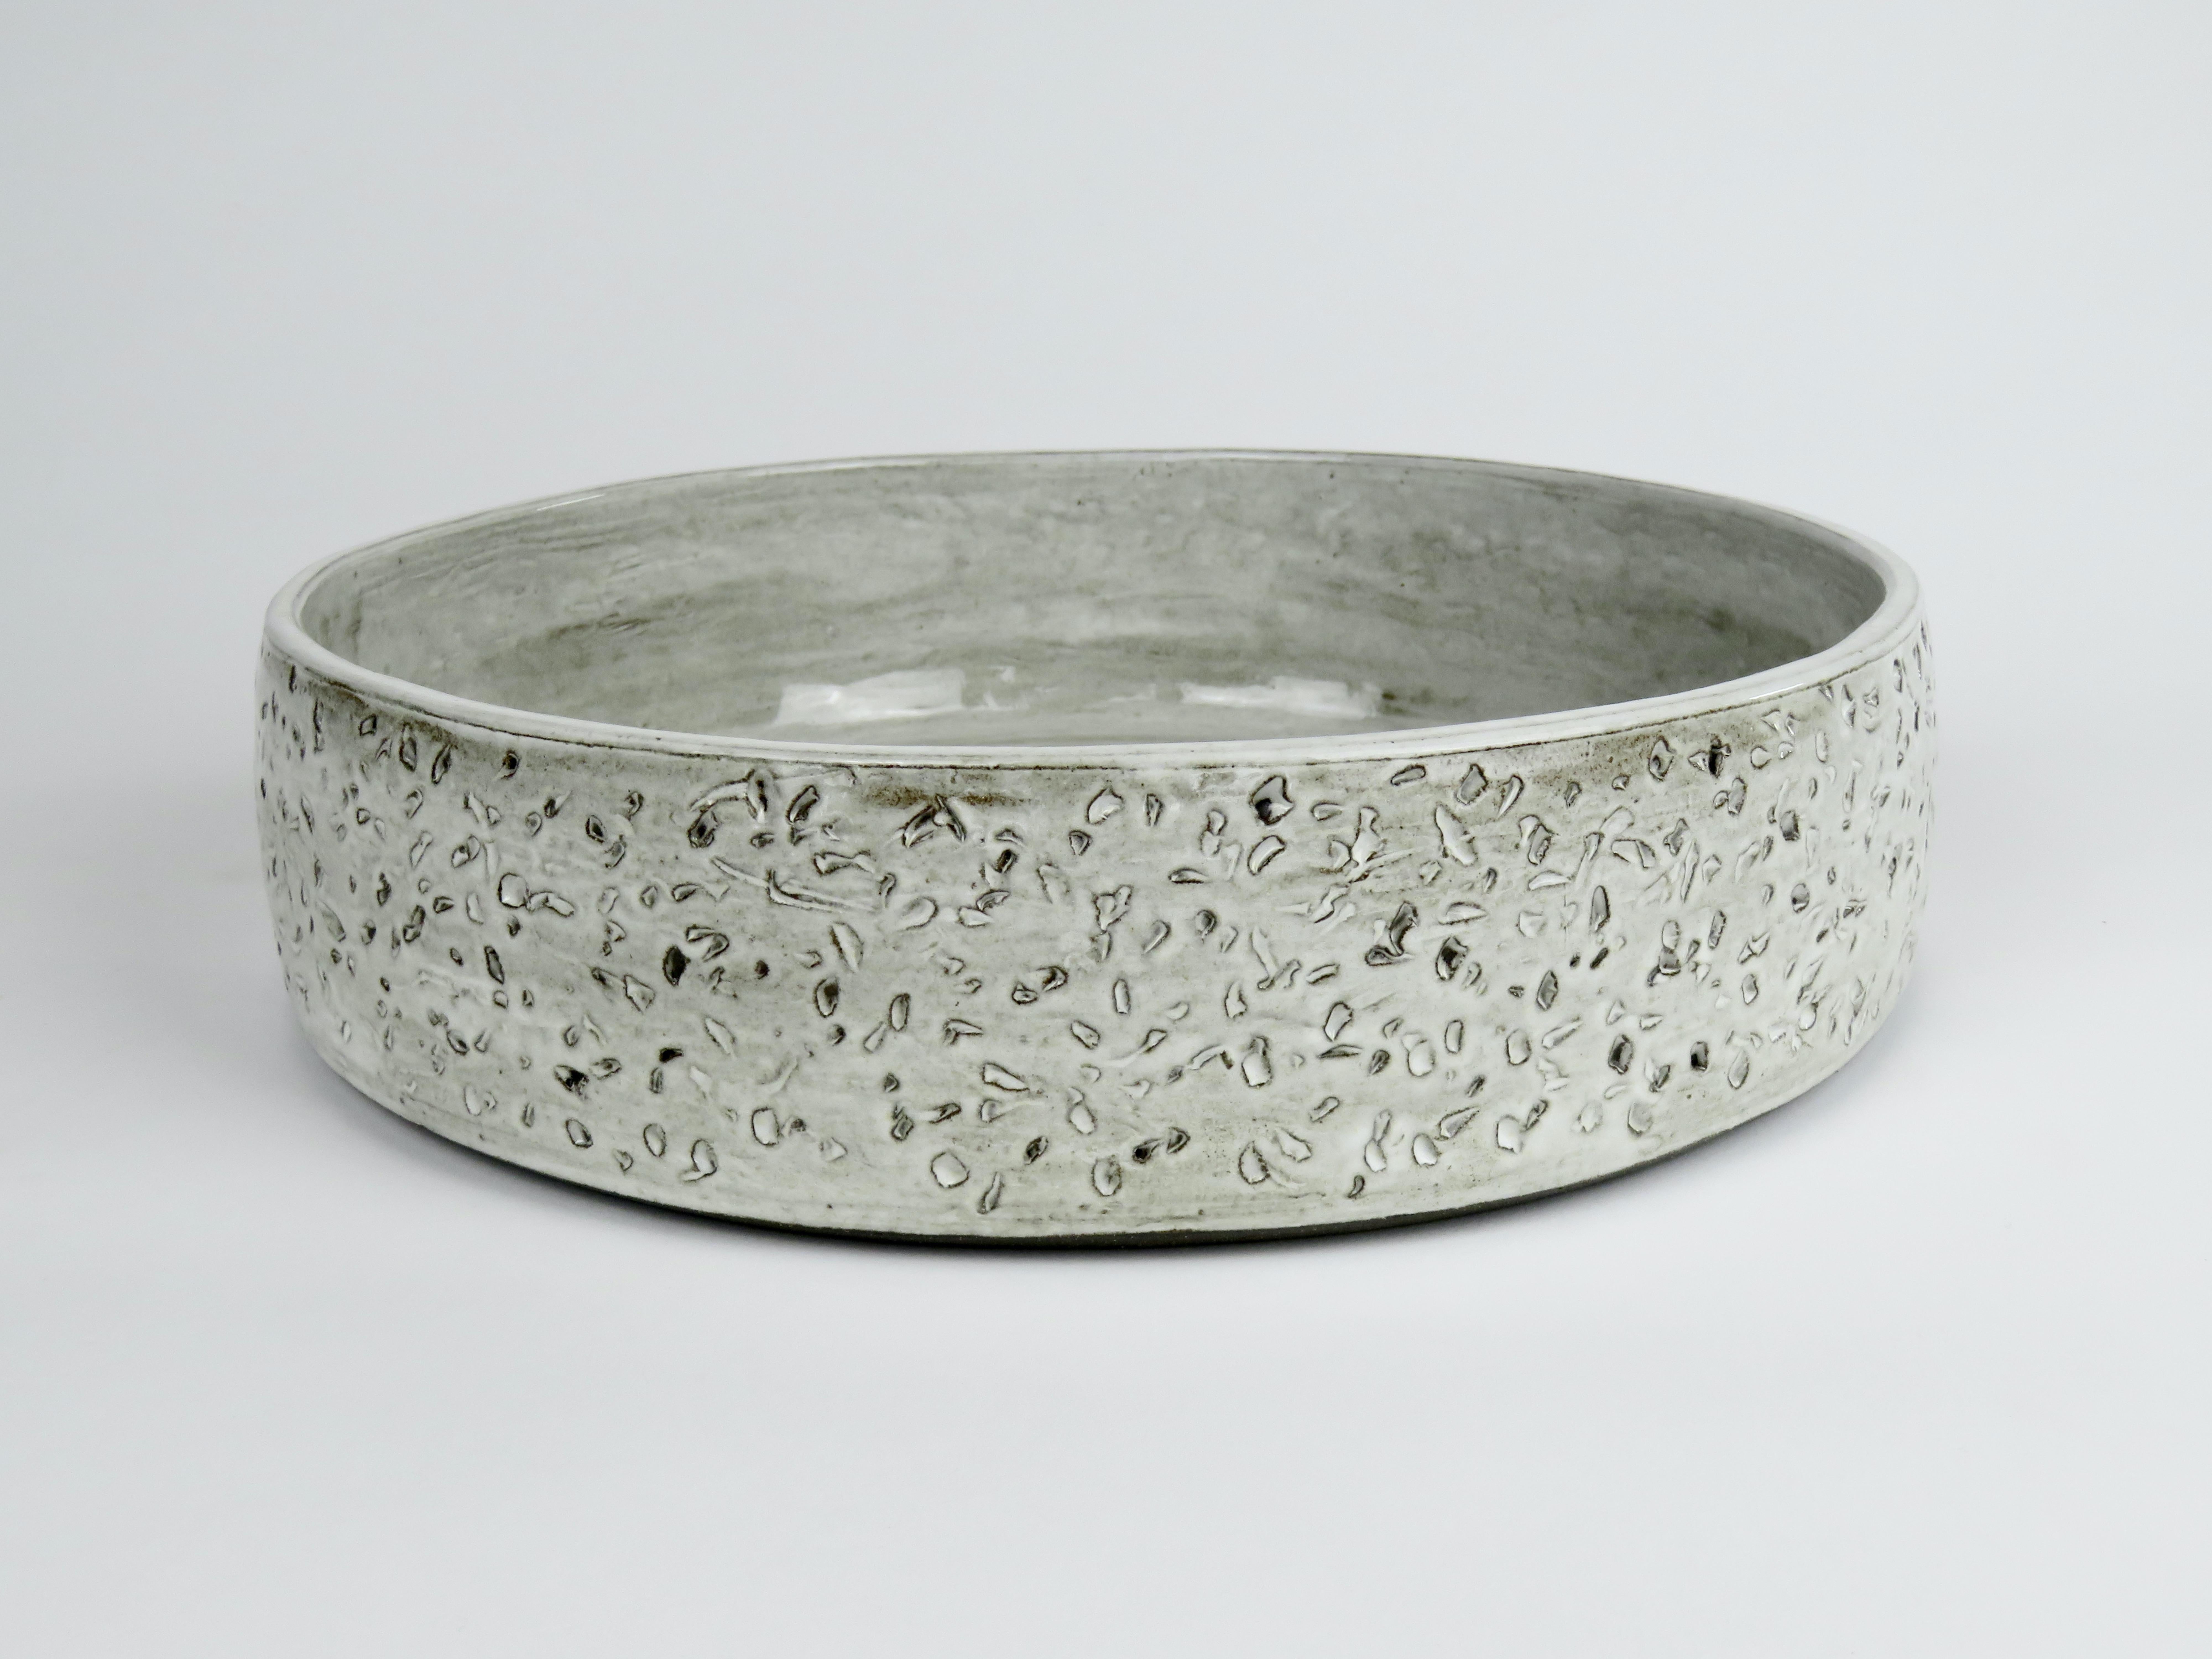 Organic Modern Large Flat Serving Bowl, Hand Carved Exterior In Off-White Glaze, Ceramic For Sale